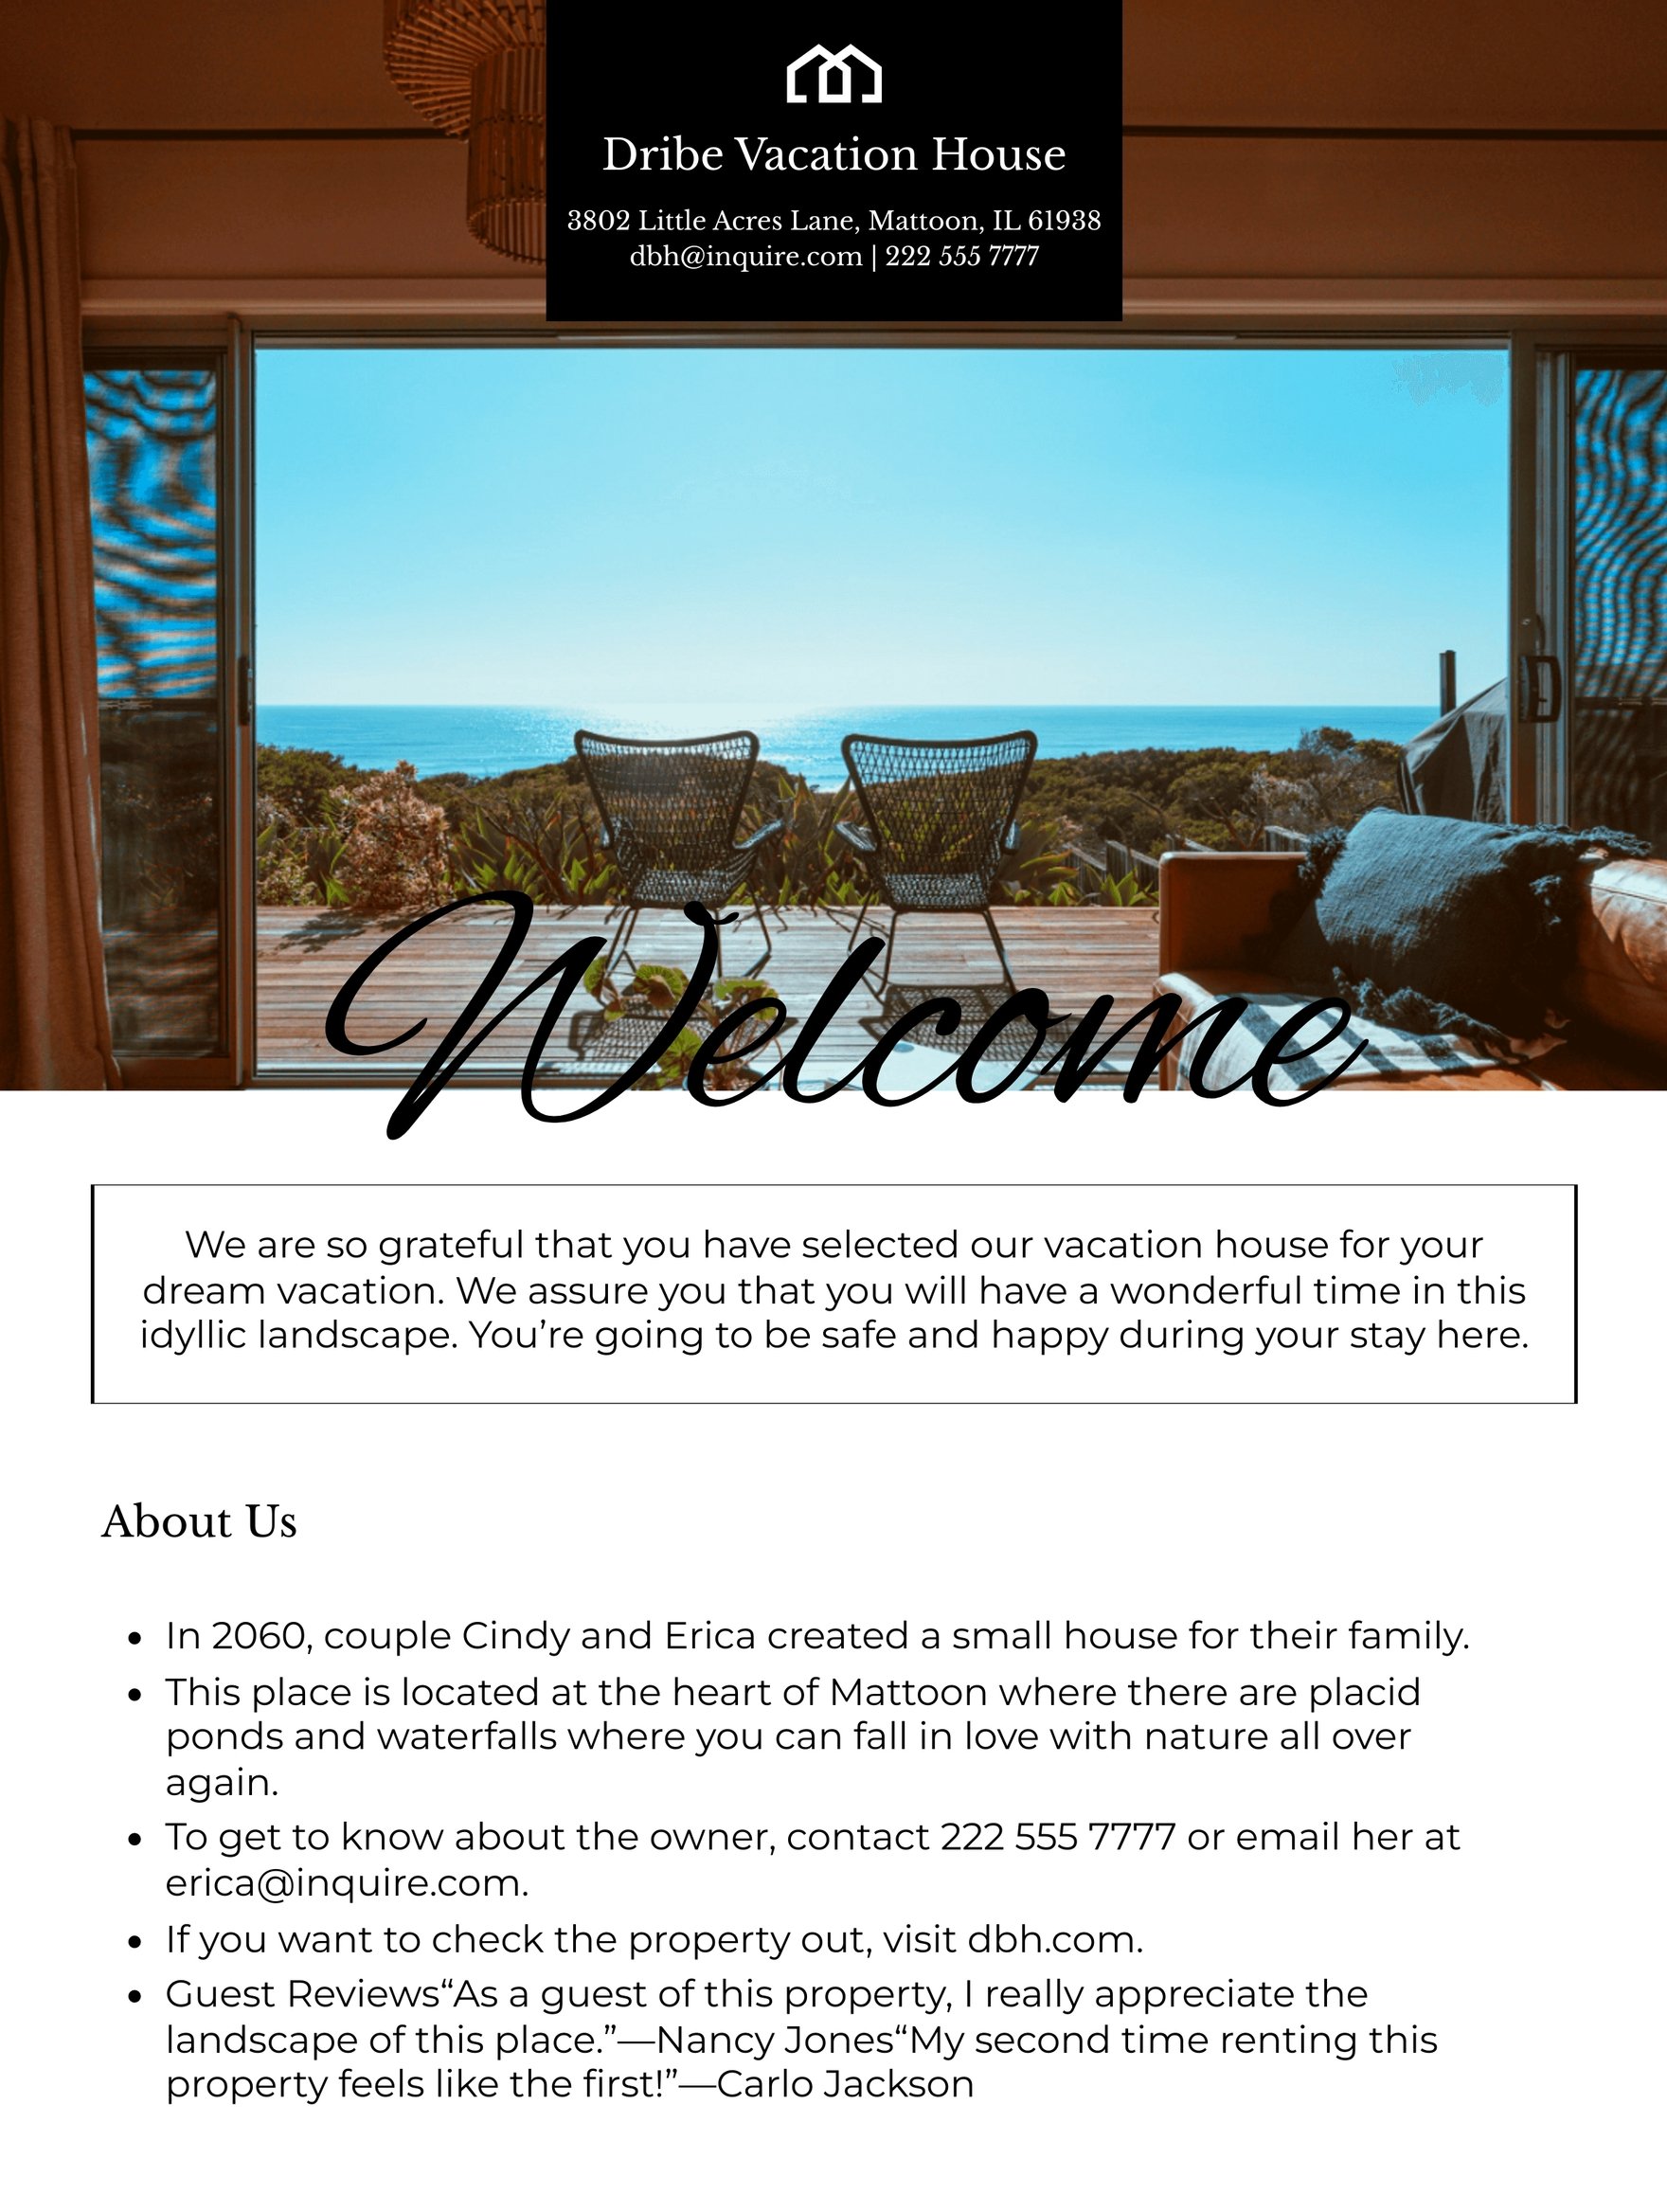 Landscape Airbnb Welcome Book